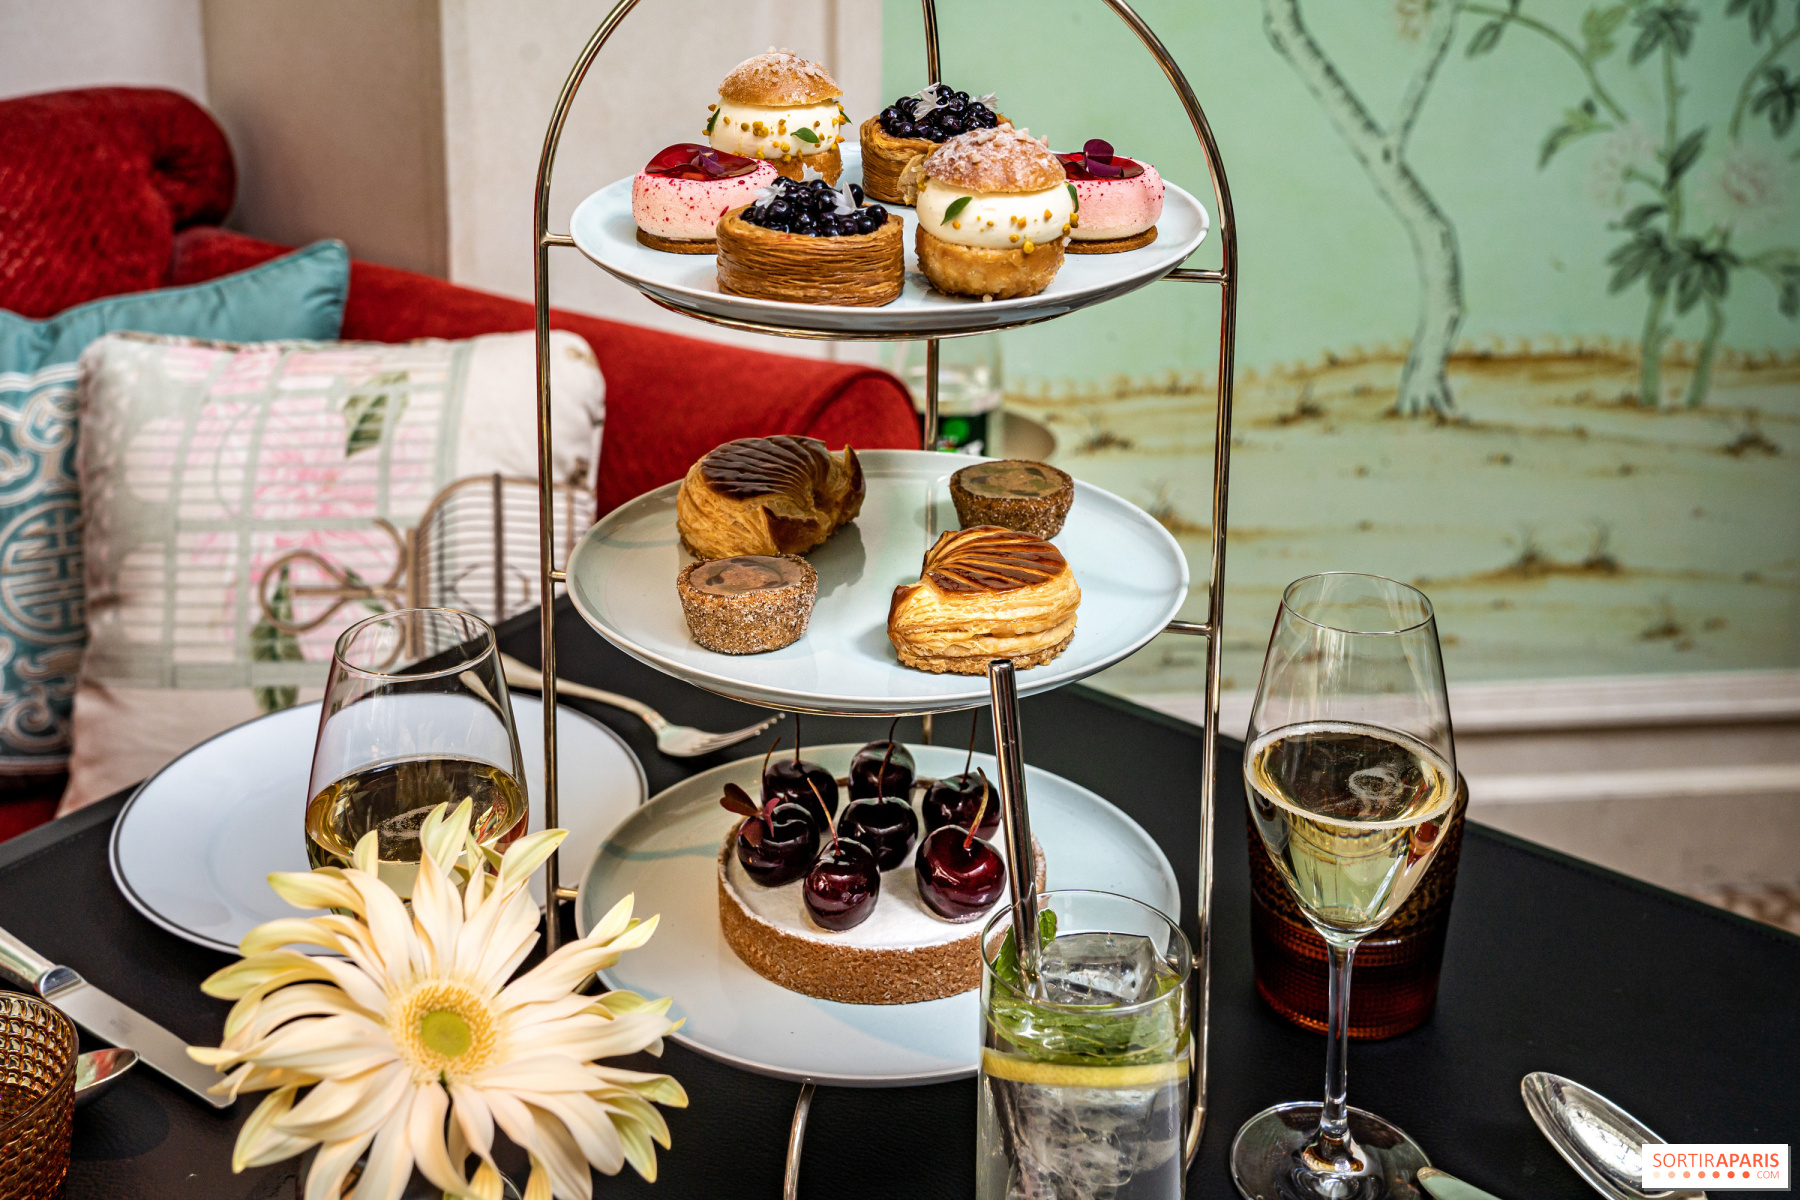 Mariage Frères launches their first Christmas teatime in Paris 